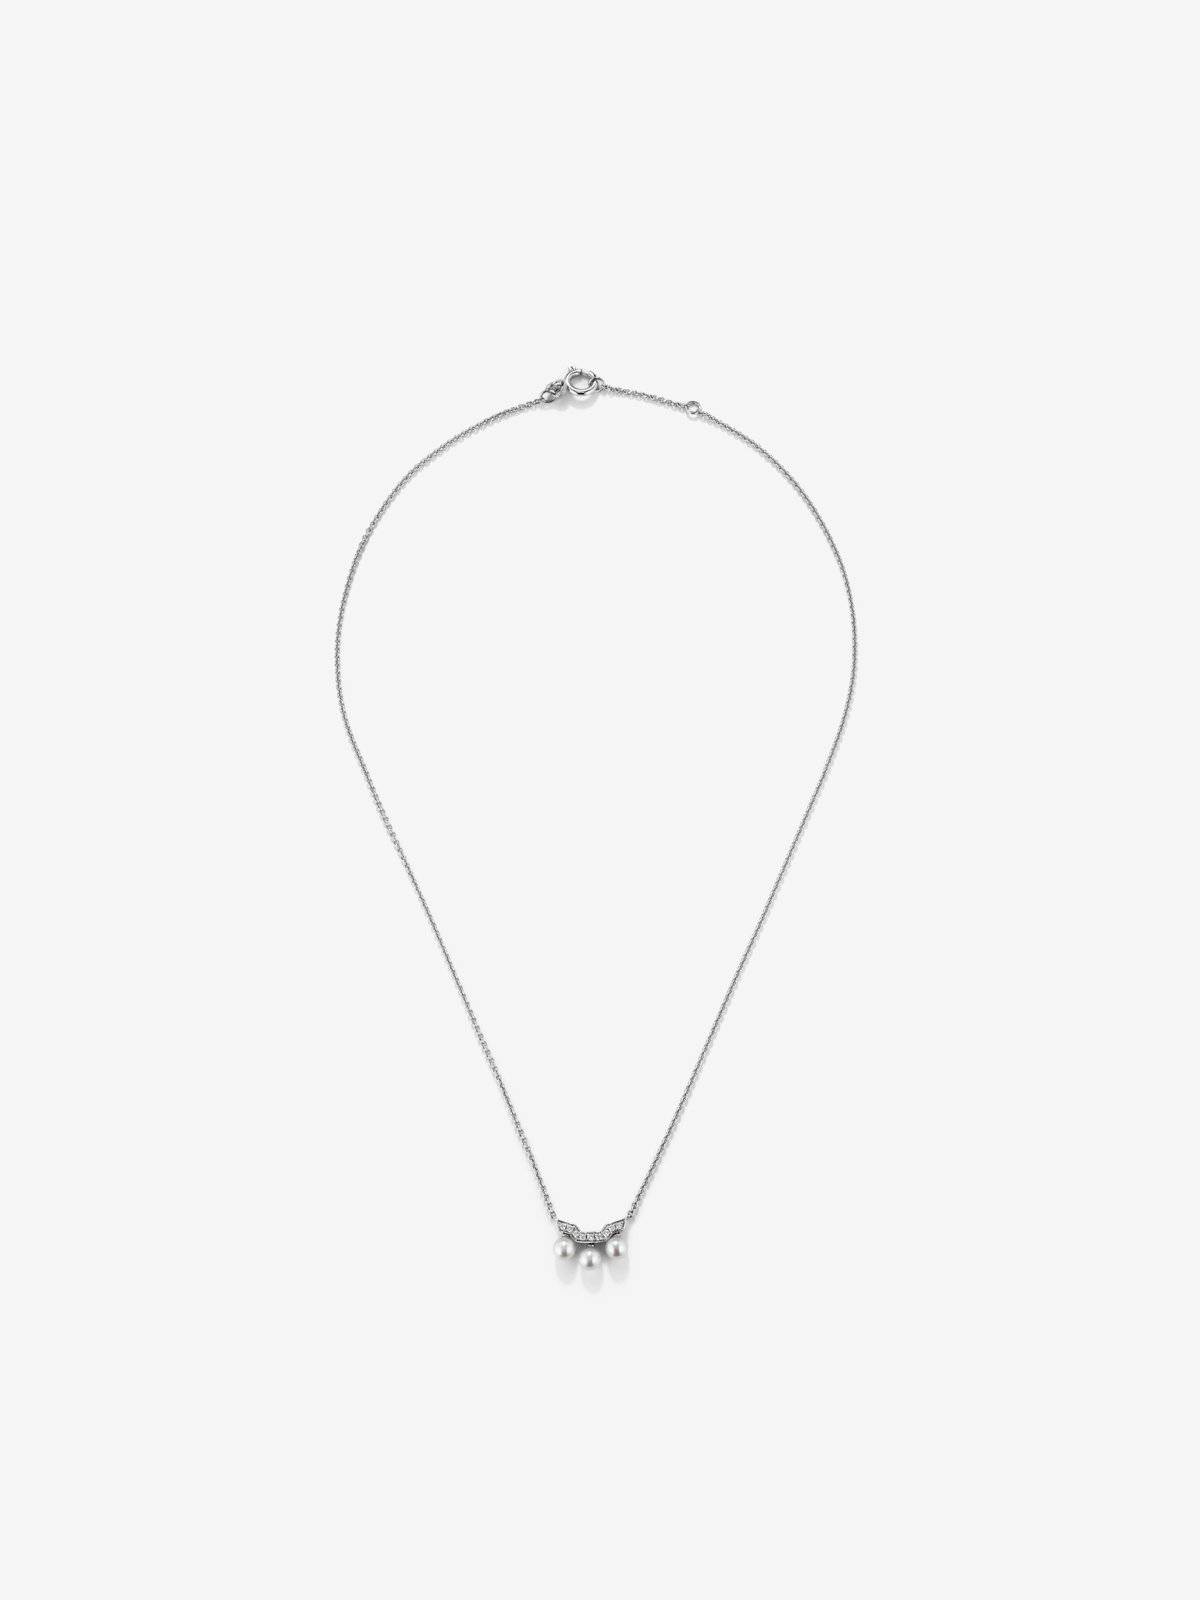 18k white gold pendant chain with three Akoya pearls and diamonds.